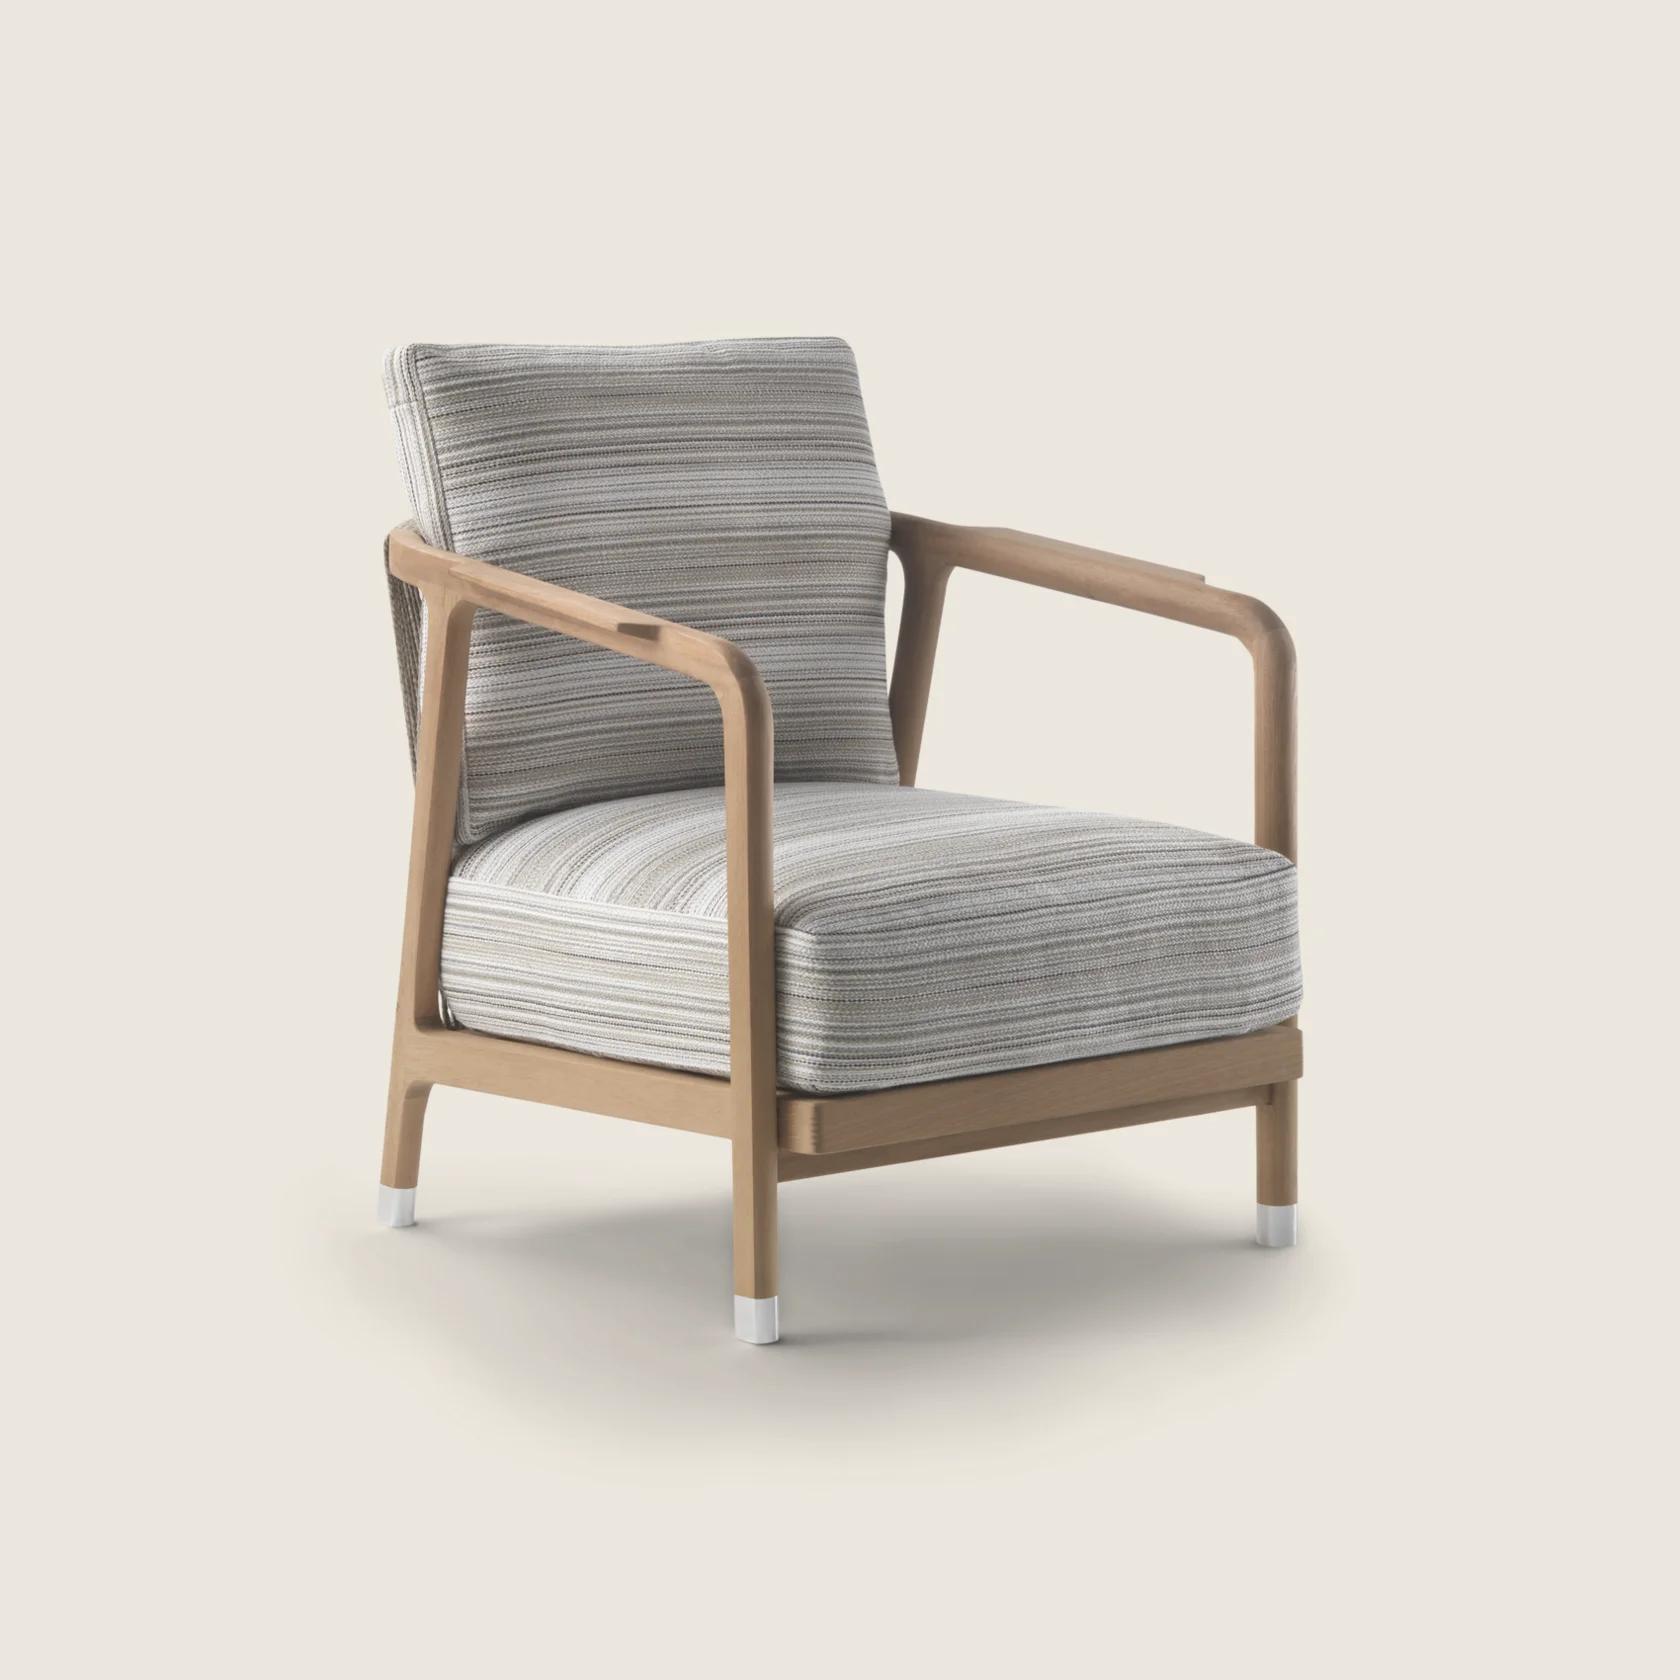 0220A1_CRONO OUTDOOR_ARMCHAIR_01.png